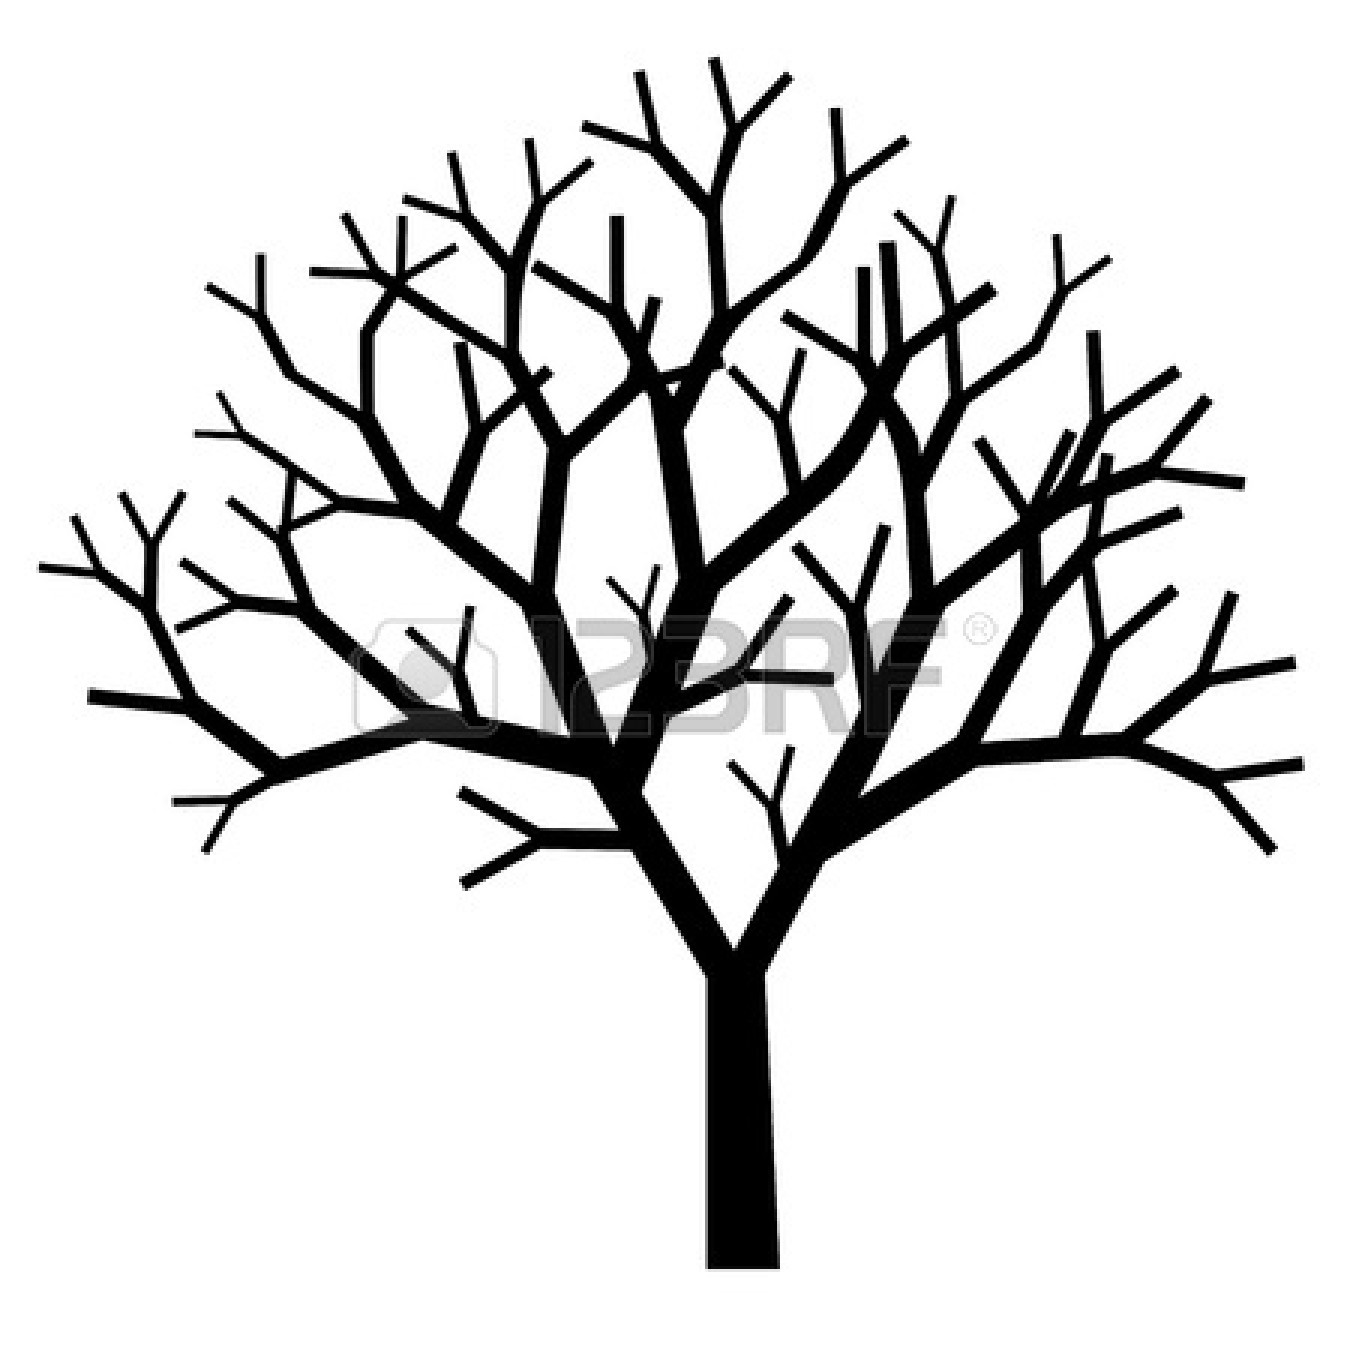 Black And White Tree Branches   Clipart Panda   Free Clipart Images